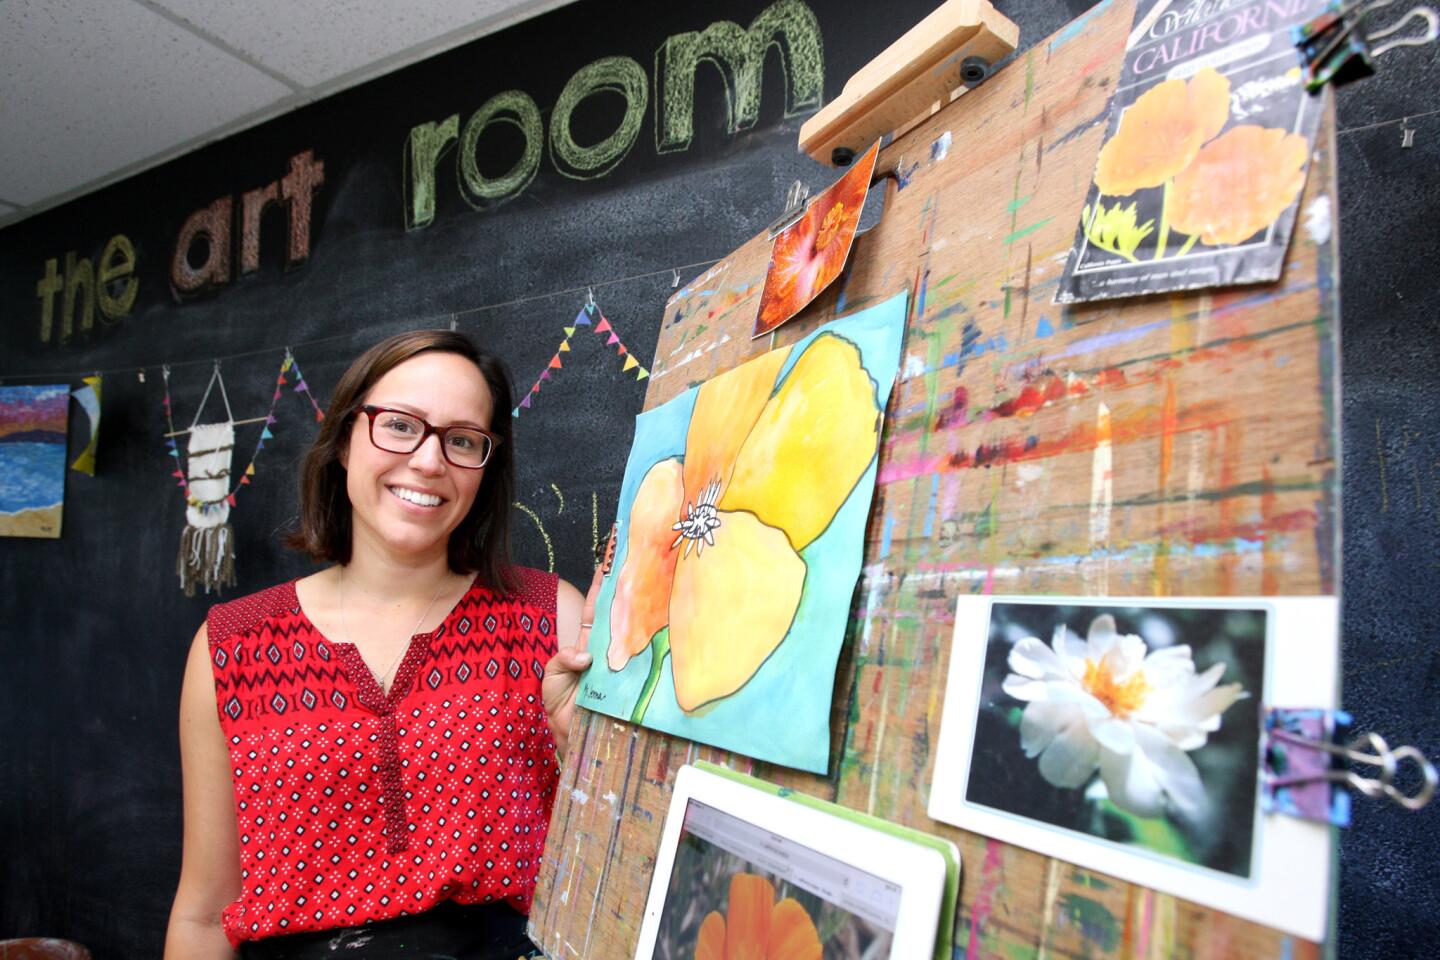 The Art Room owner Jenna Macho of Burbank, at her studio in La Crescenta on Wednesday, July 13, 2016. Macho has owned the studio for more than eight years. The lesson this day was about cool and warm colors, in the Georgia O'Keeffe style.